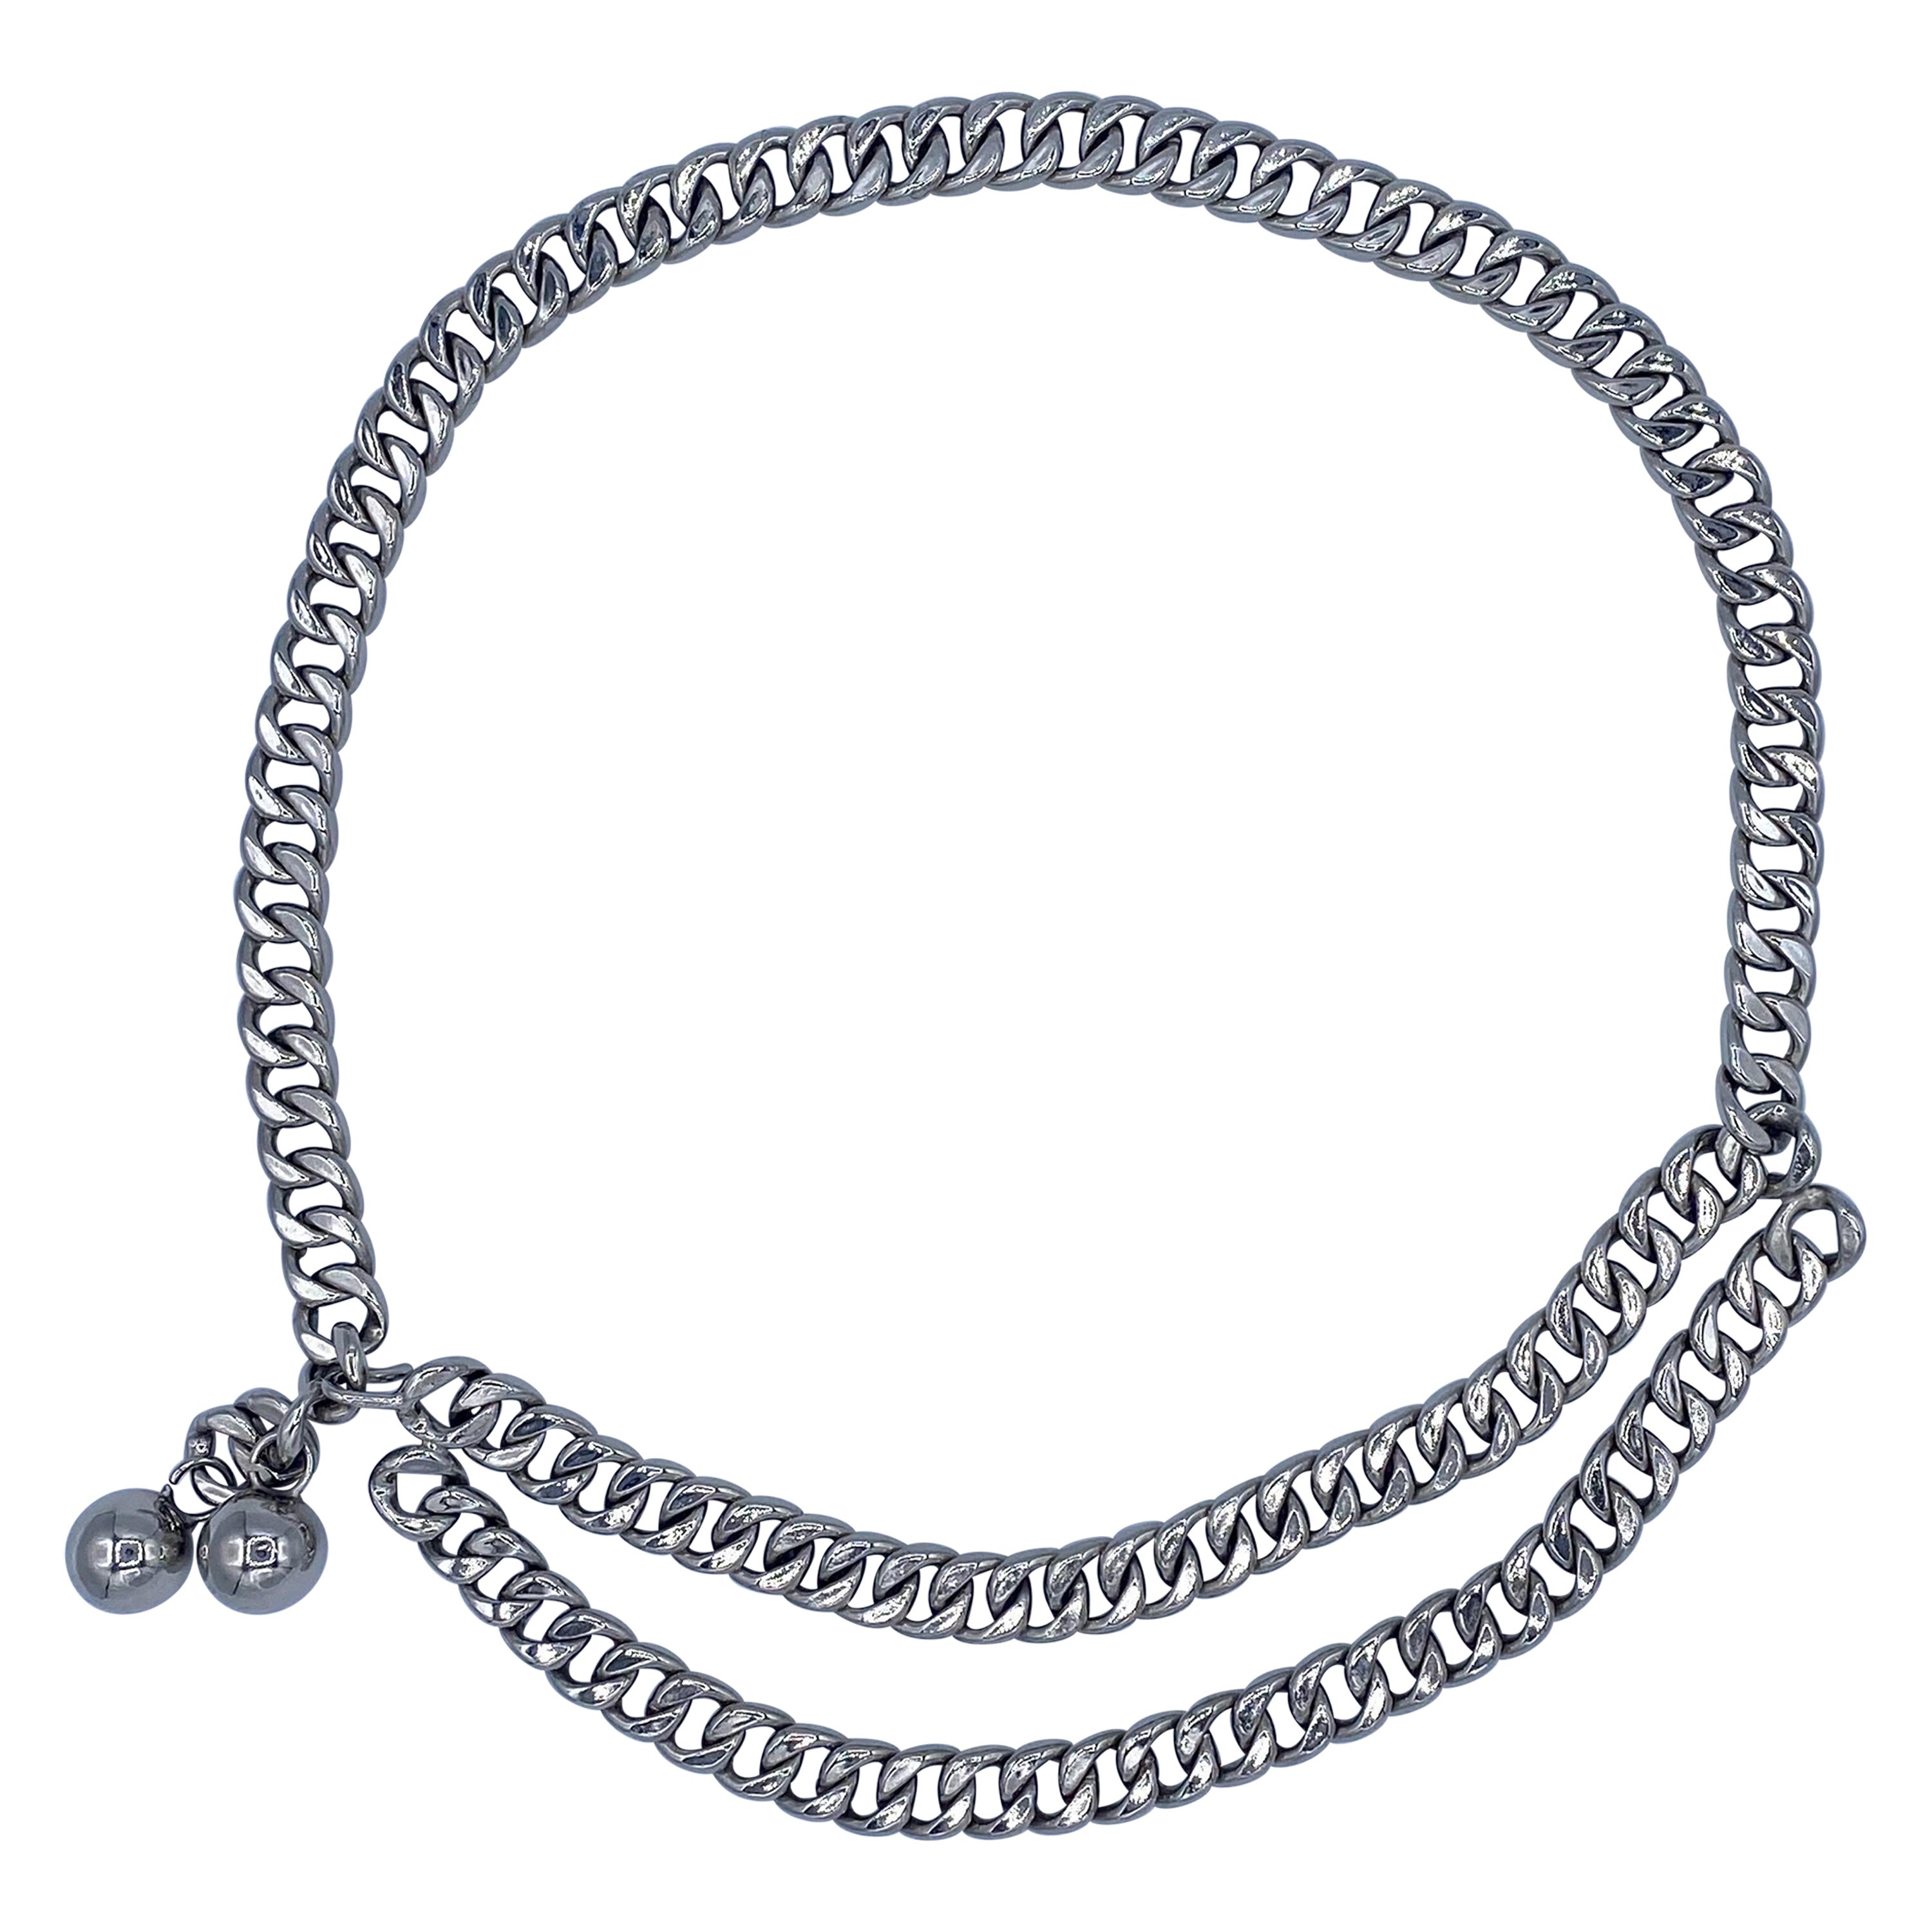 Vintage Chanel heavy silver chain link belt For Sale